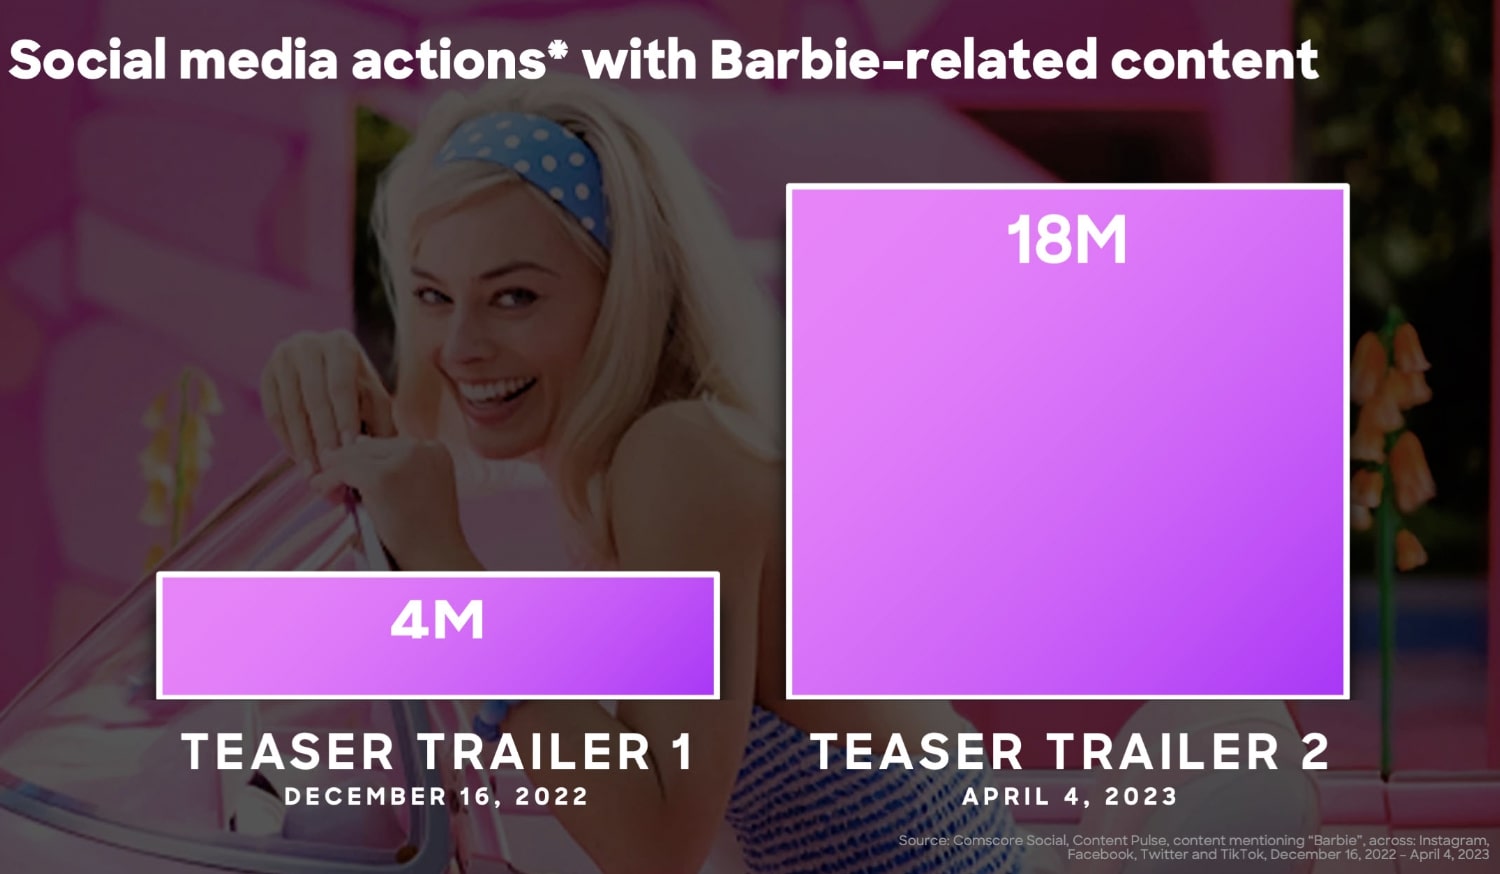 The Barbie movie’s first teaser trailer generated around 4 million engagements, while the second teaser generated around 18 million engagements